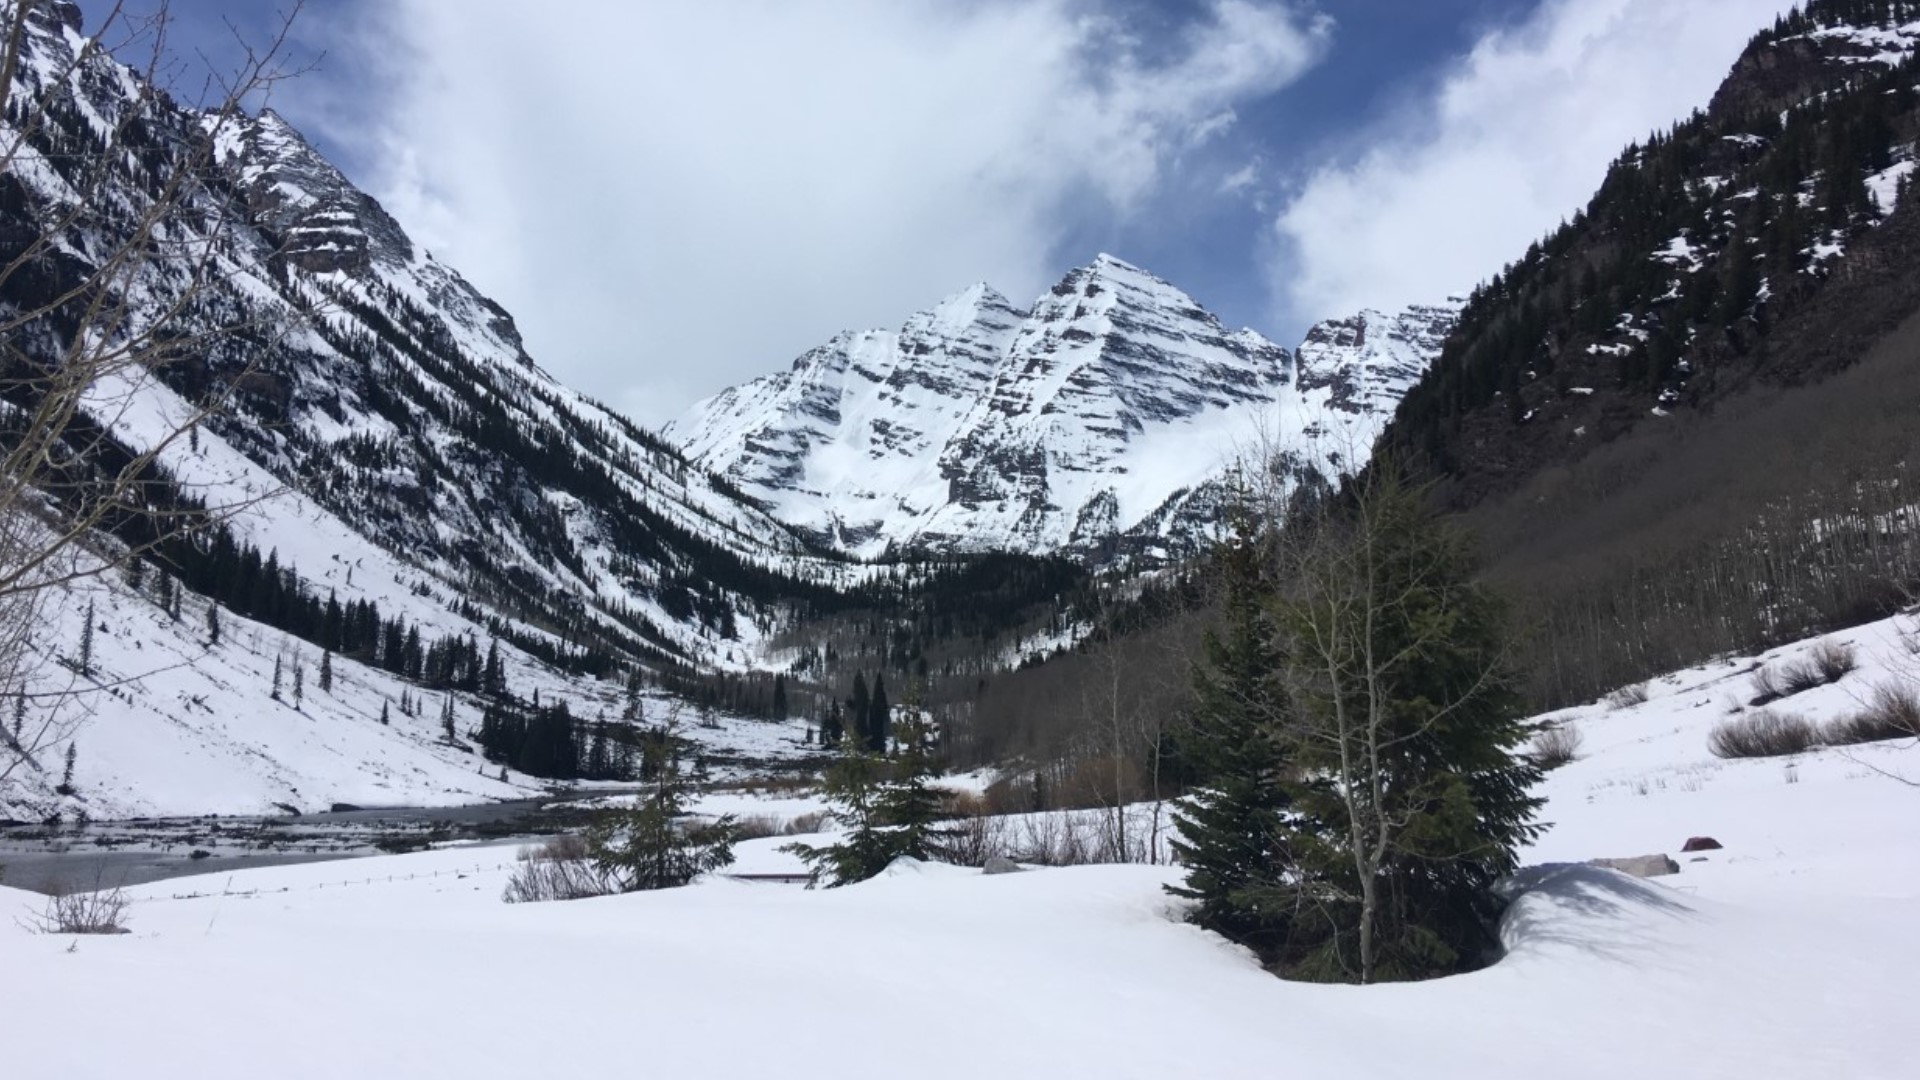 Maroon Bells Scenic area has updated their tentative open date: May 24. 16 weddings are planned there between May 27 and June 14.